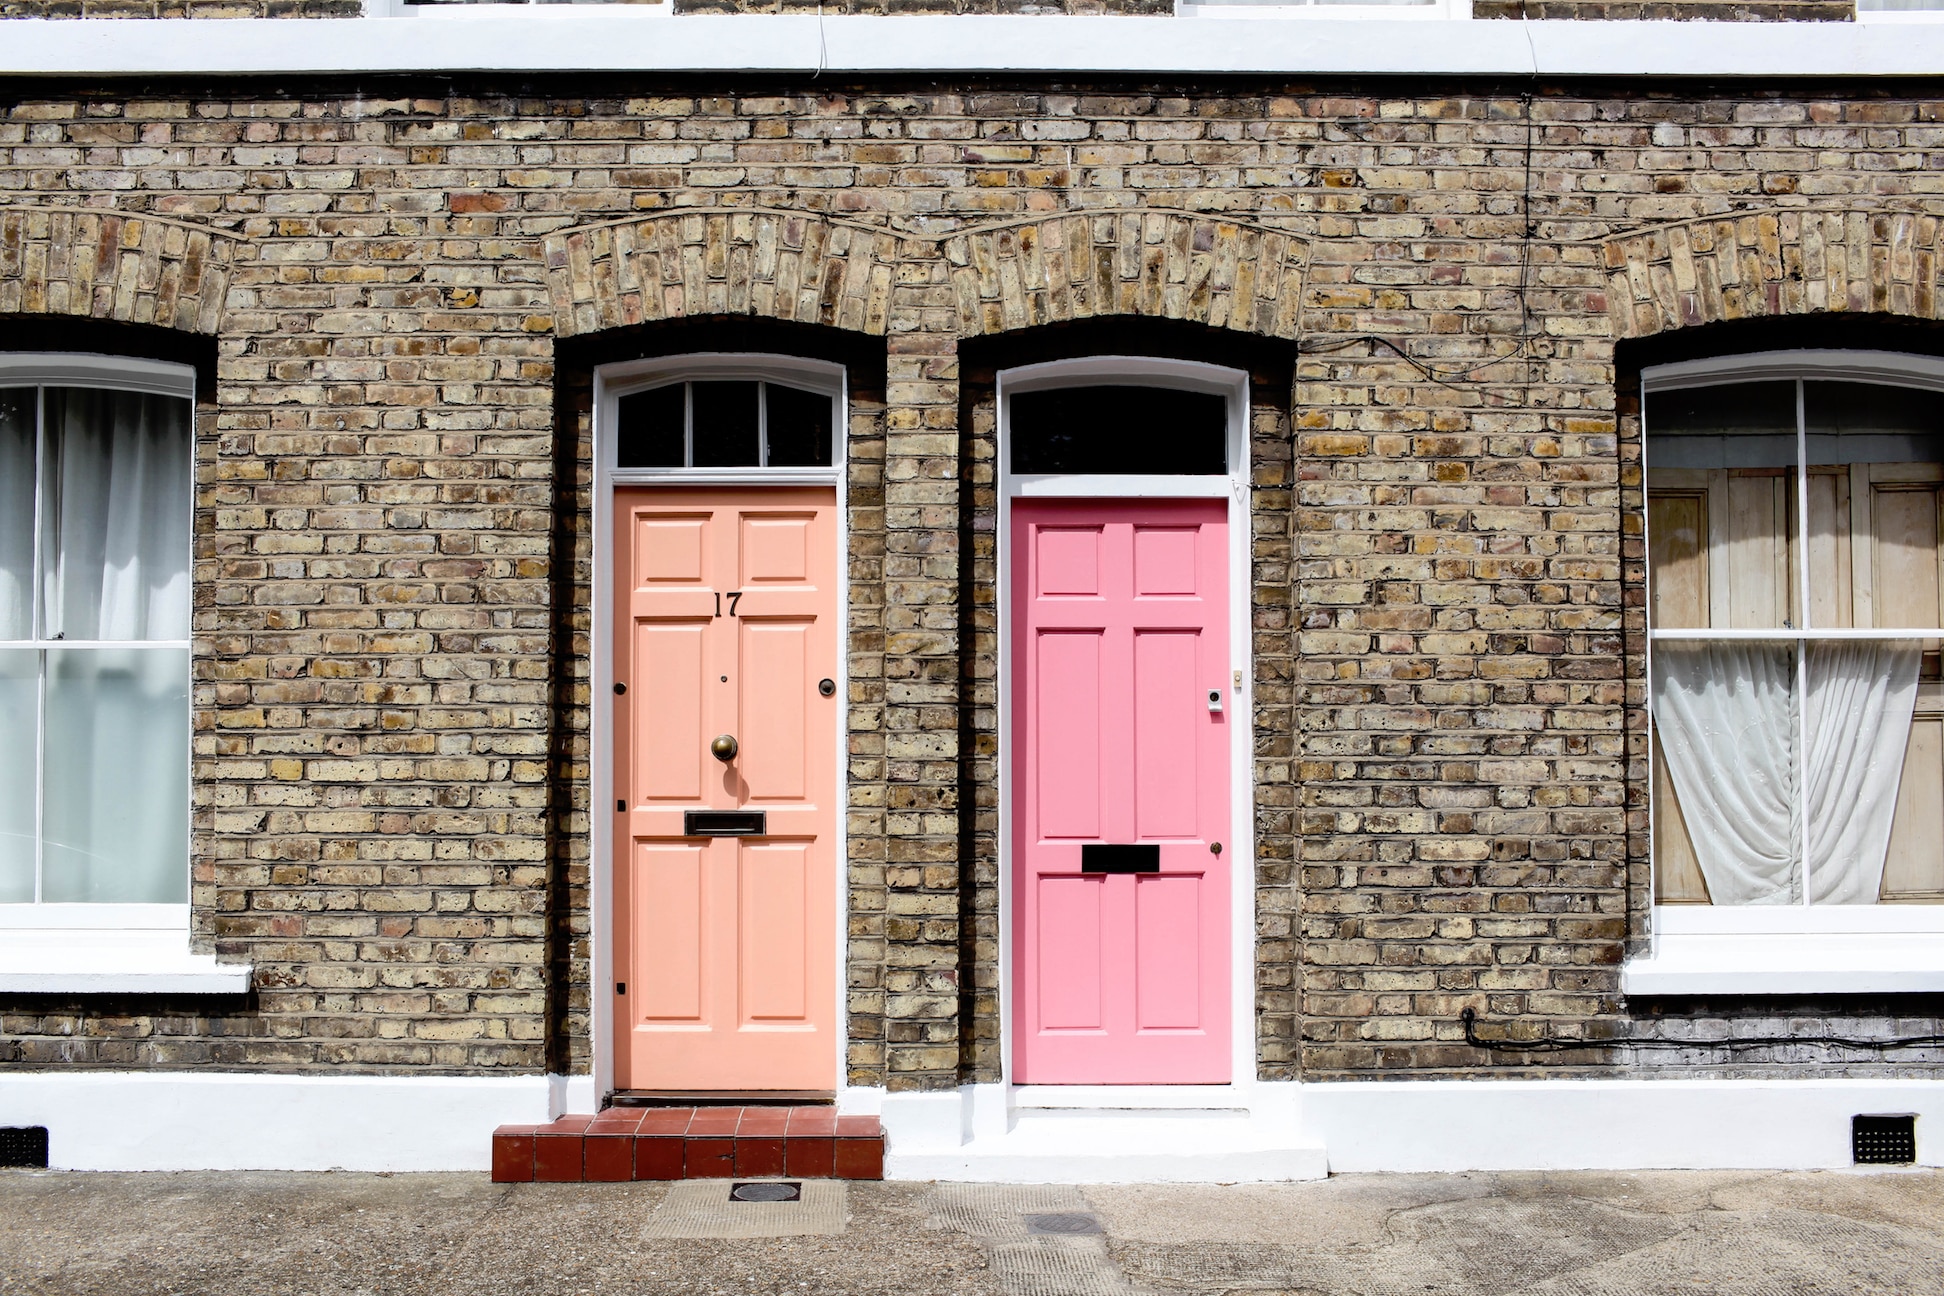 Top Tips: Buying a house - what does the conveyancing process involve?